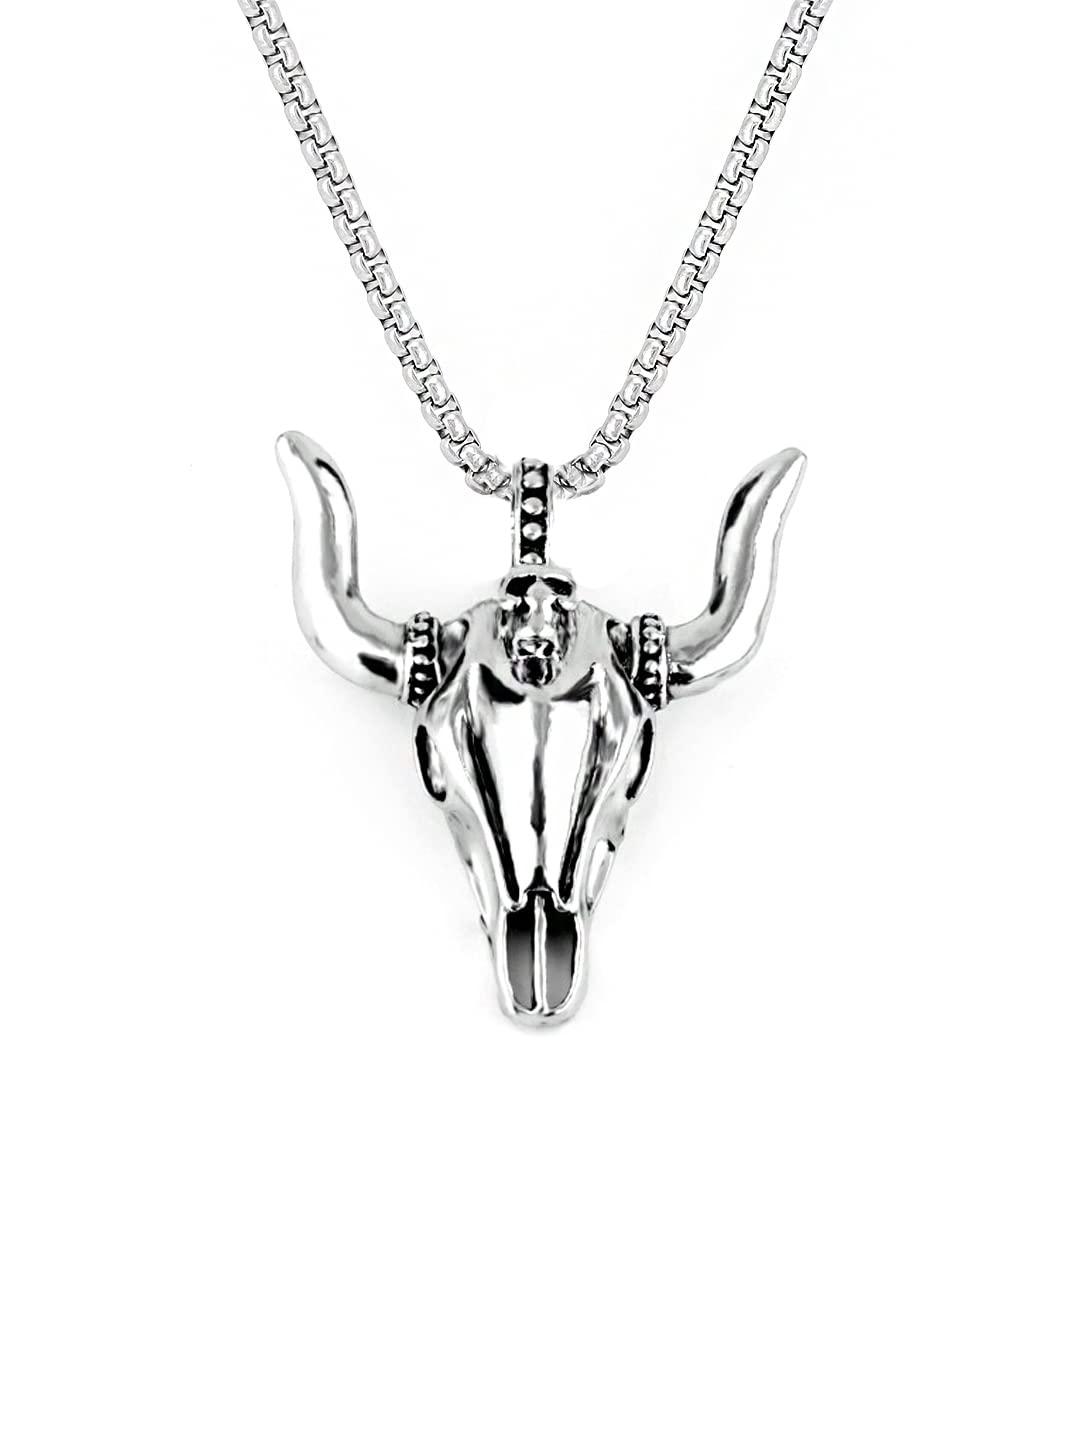 Bull Head - Pendant With Pure Titanium Steel 24Inch Round Box Chain For Men American Trending Style